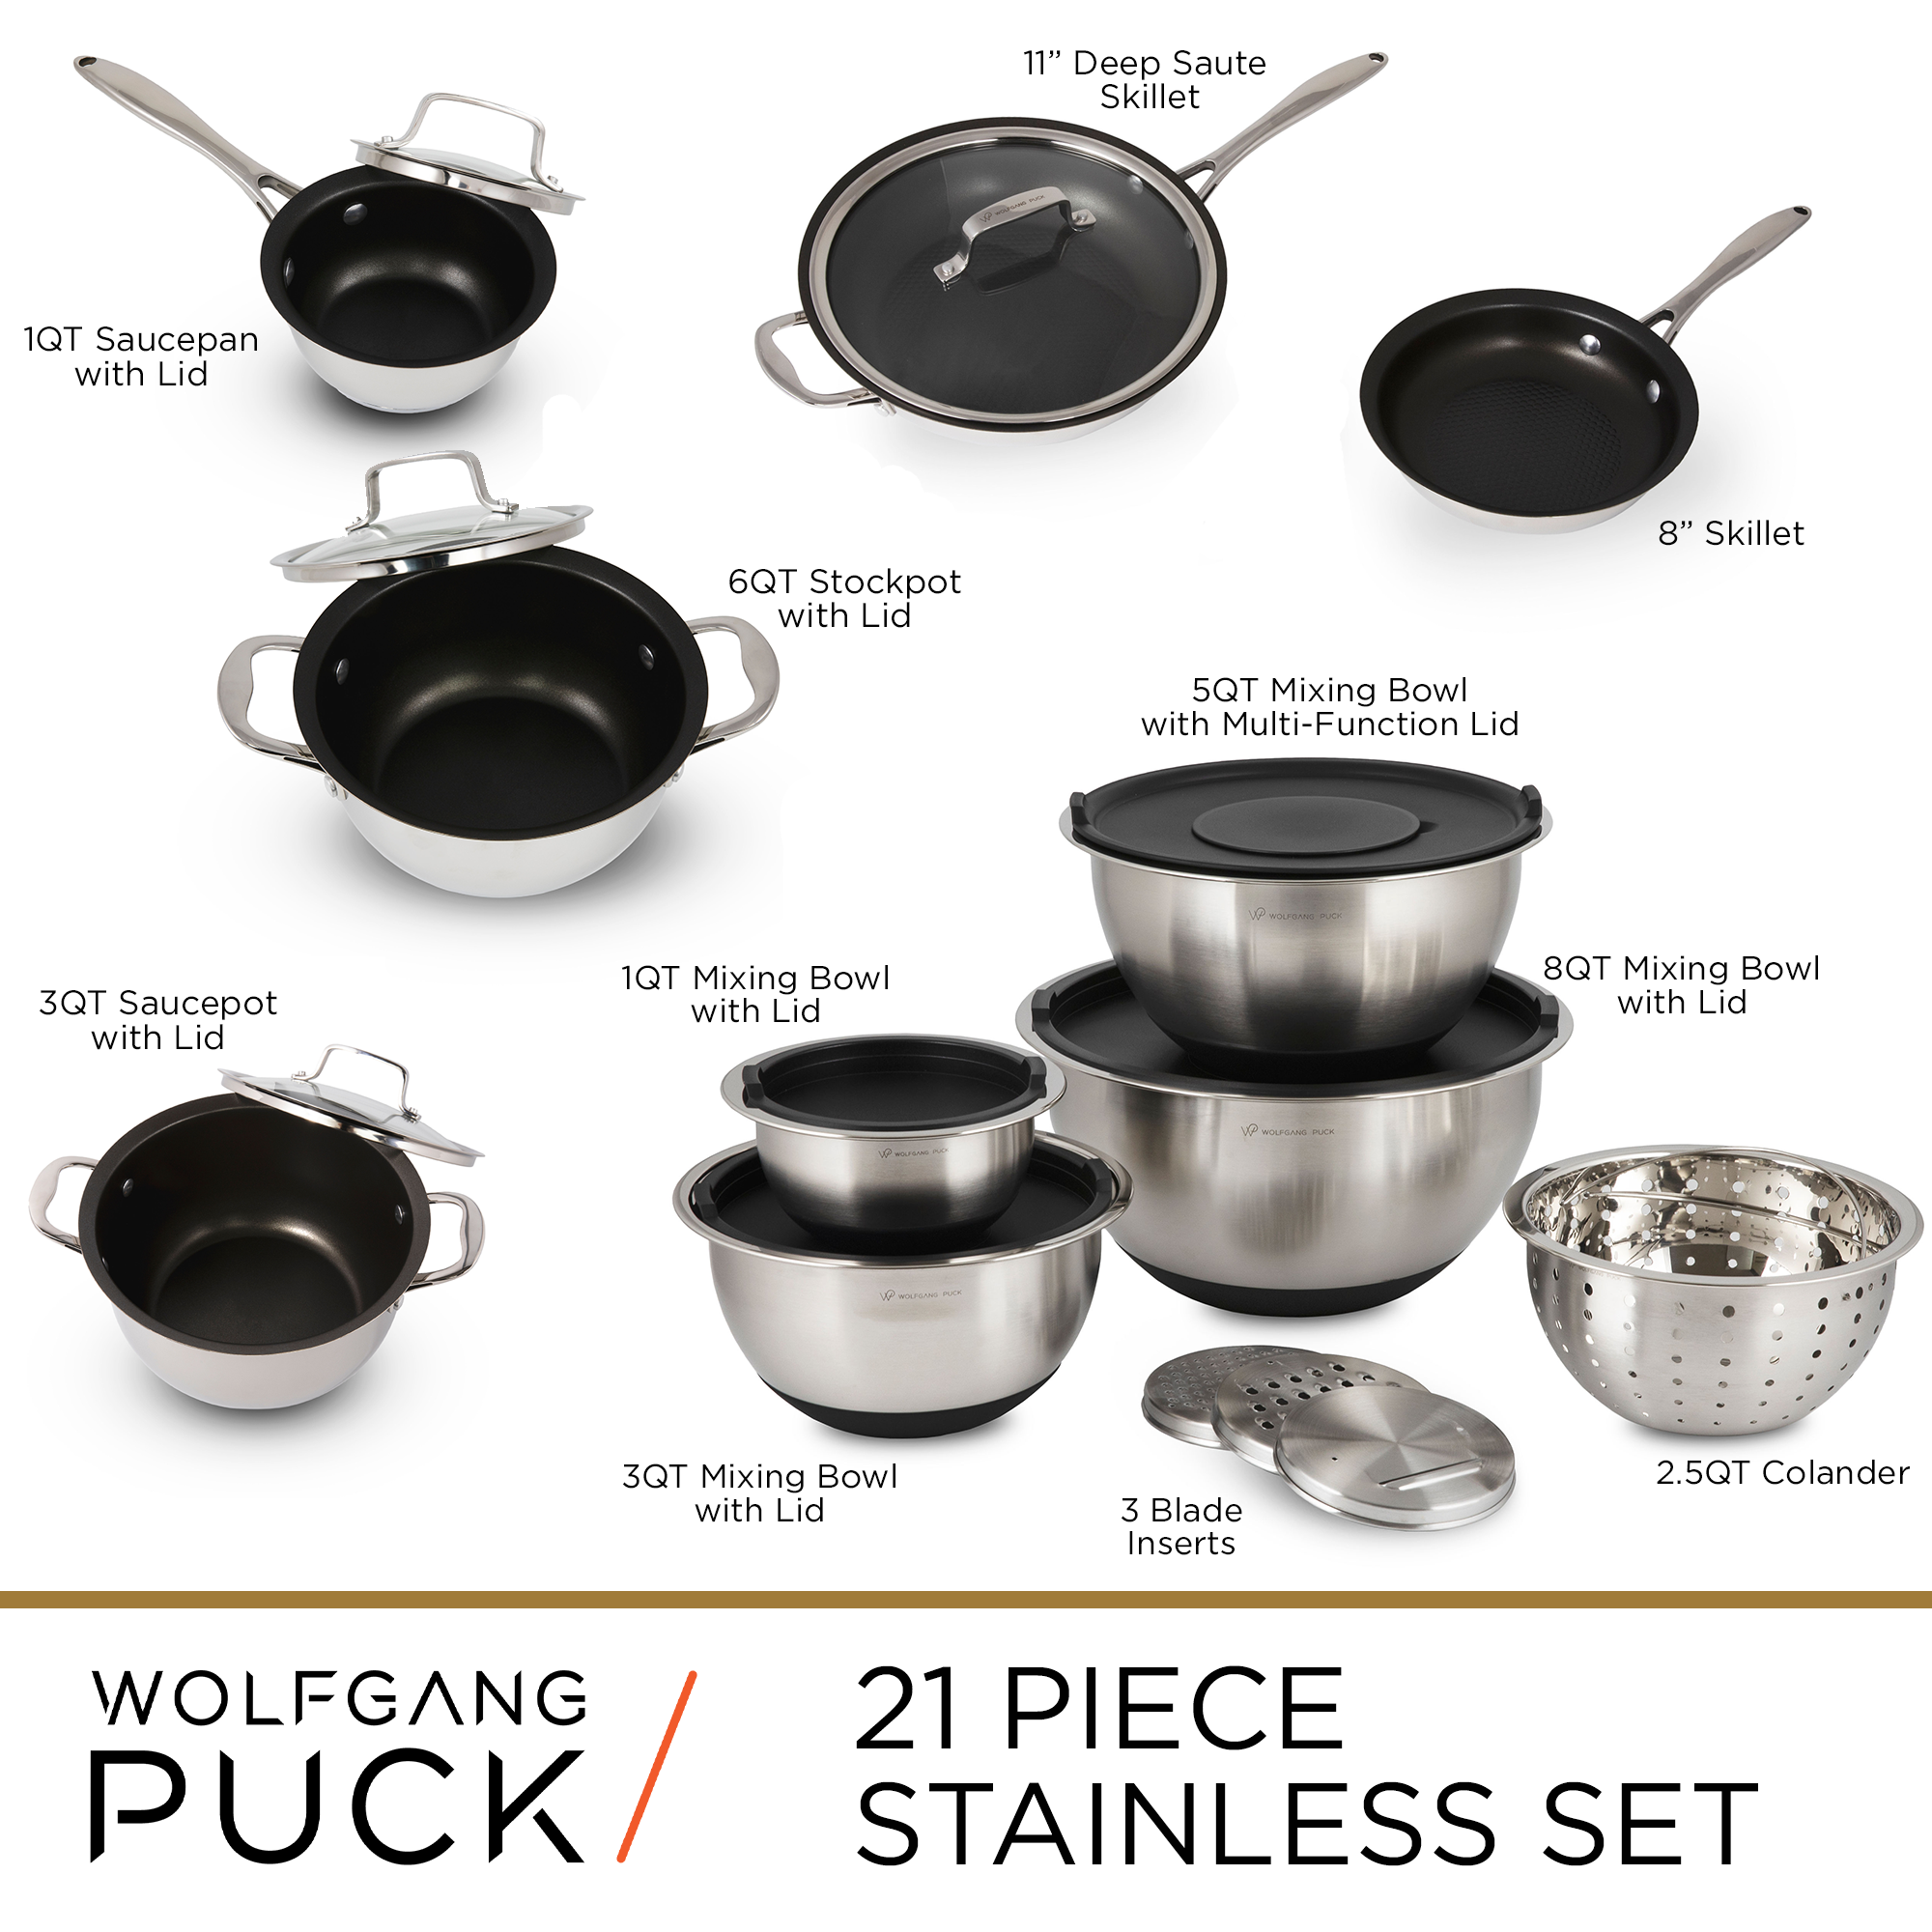 Wolfgang Puck 21-Piece Stainless Steel Cookware and Mixing Bowls Set, Non-Stick Pots, Pans & Skillets; Nesting Bowls with Lids & Interchangeable